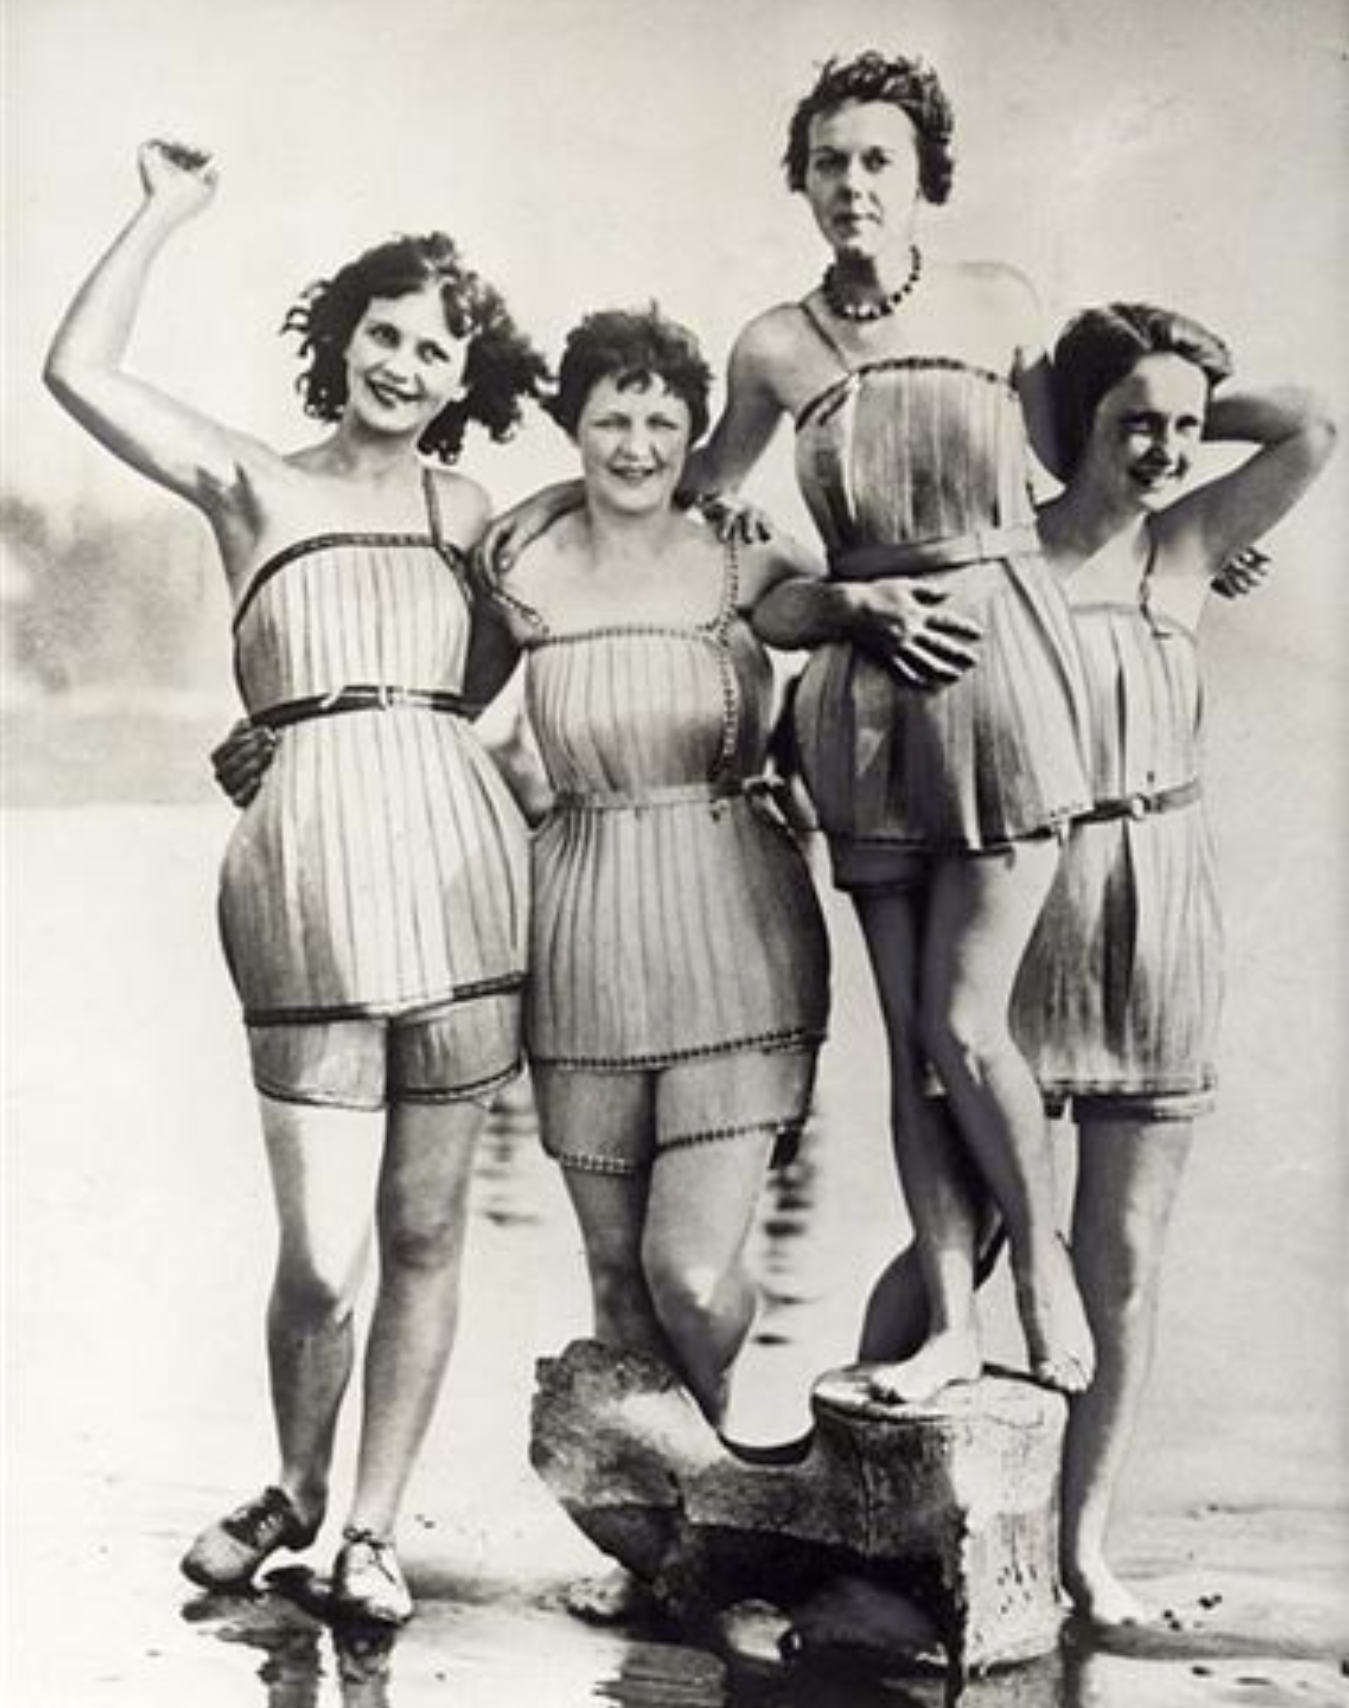 Wooden bathing suits made in 1929 that were supposed to make you more buoyant